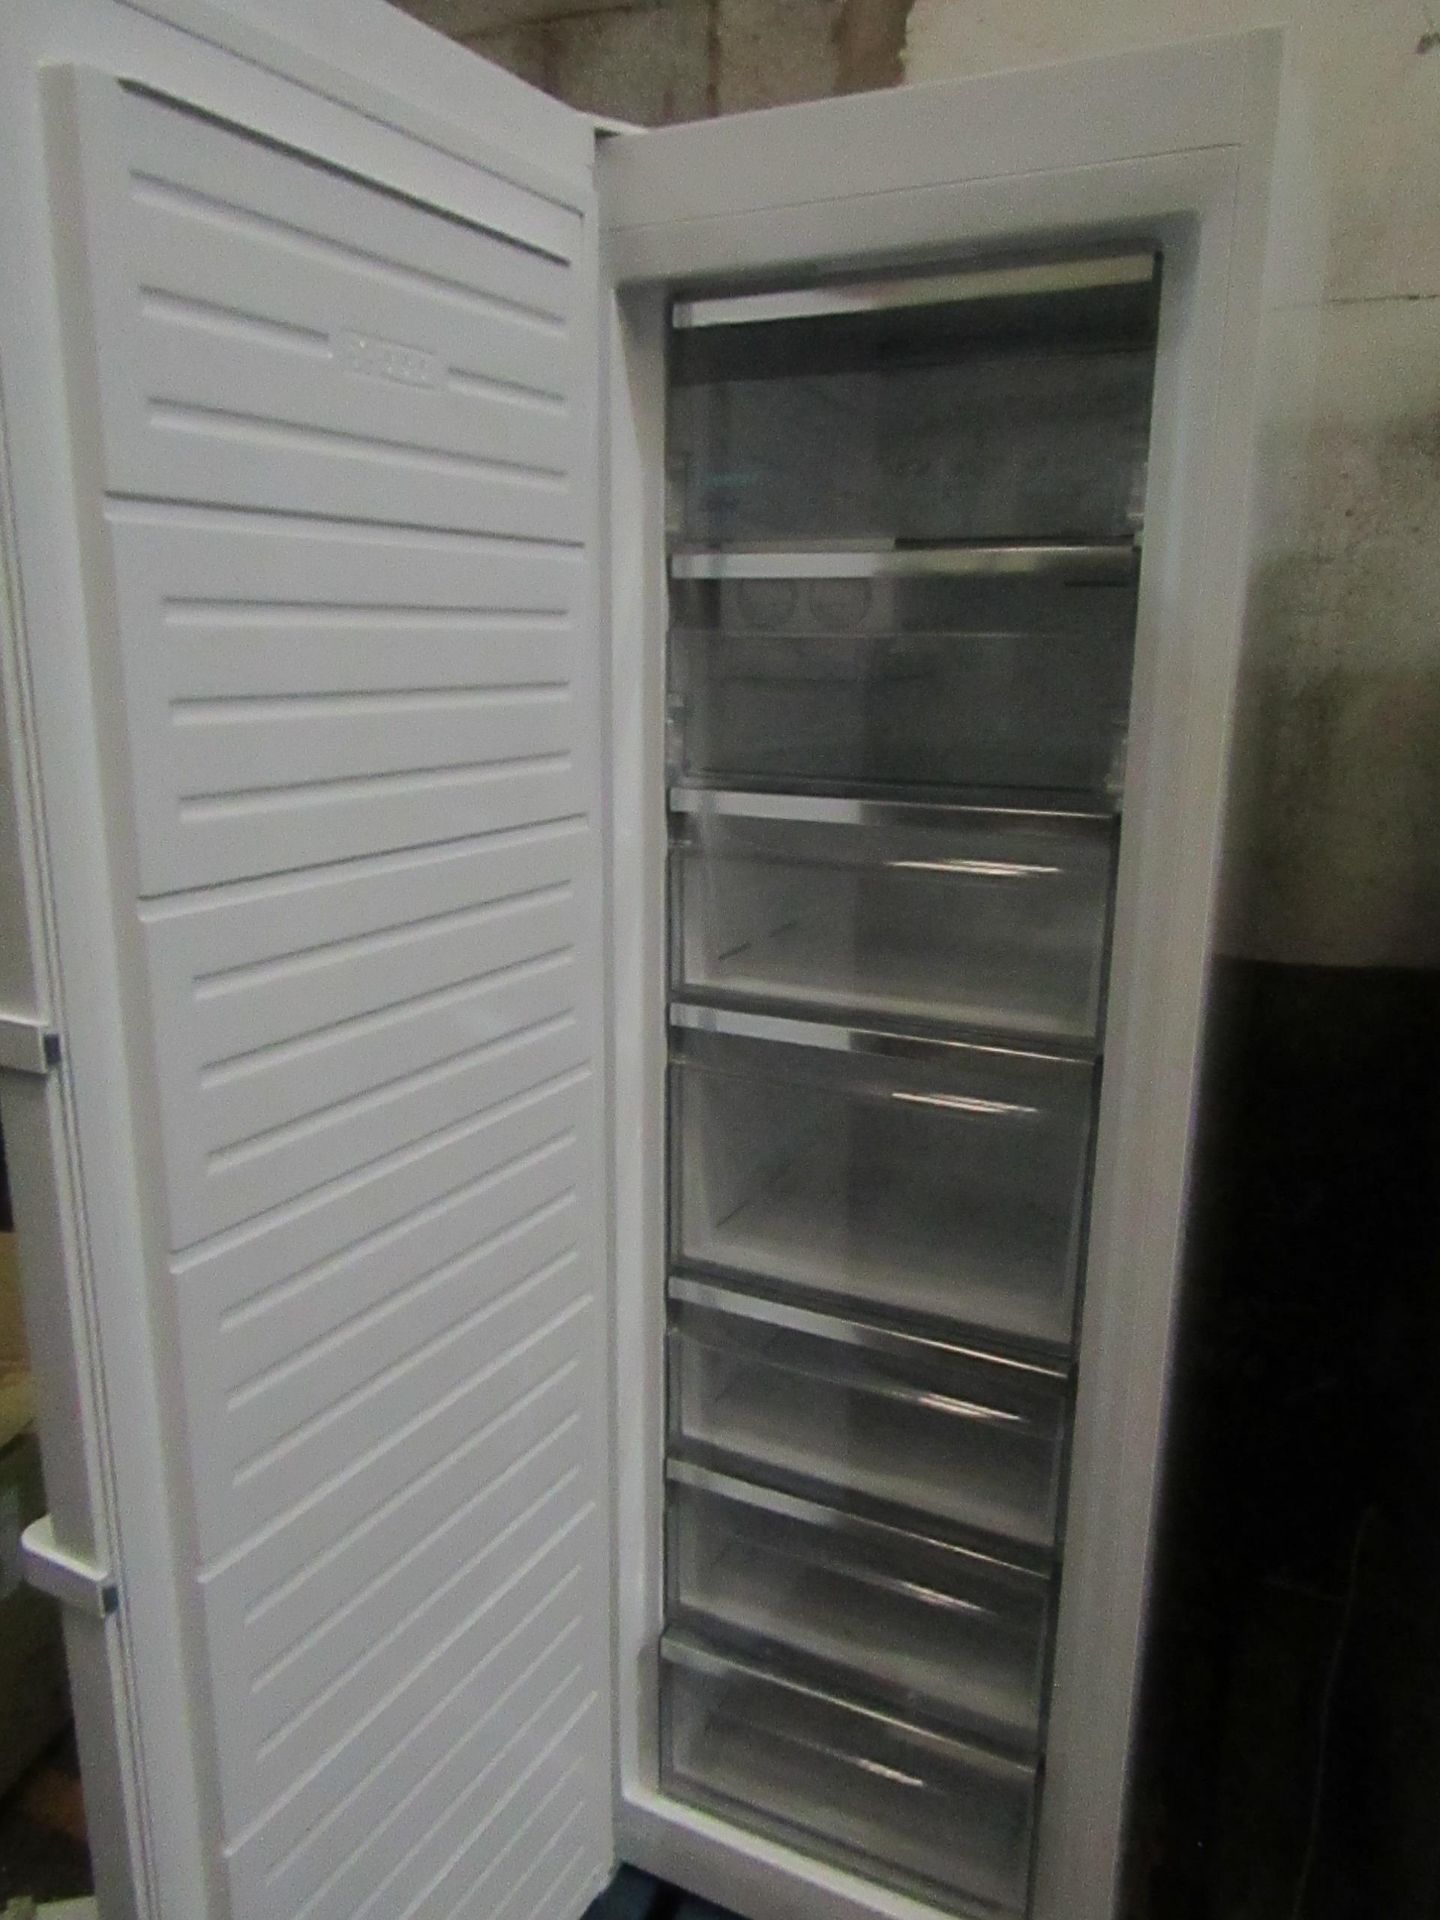 Sharp tall free standing freezer, tested working for coldness